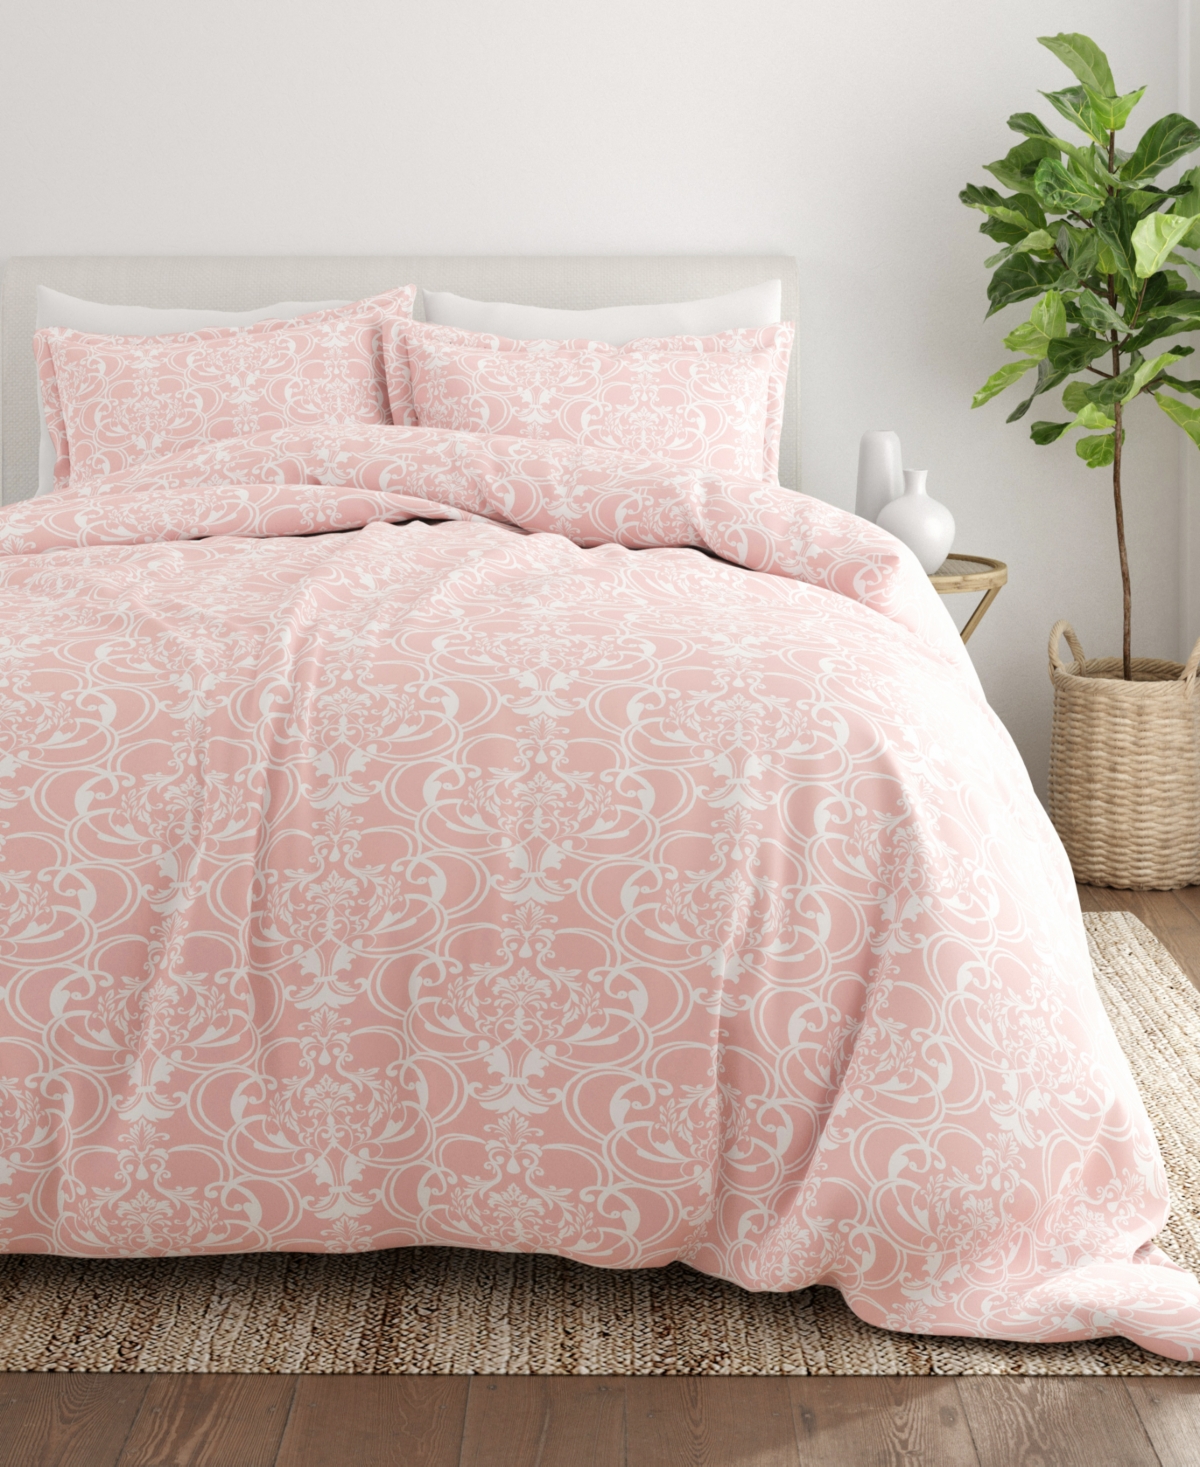 Ienjoy Home Home Collection Premium Ultra Soft 3 Piece Reversible Duvet Cover Set, Full/queen In Pink Romantic Damask